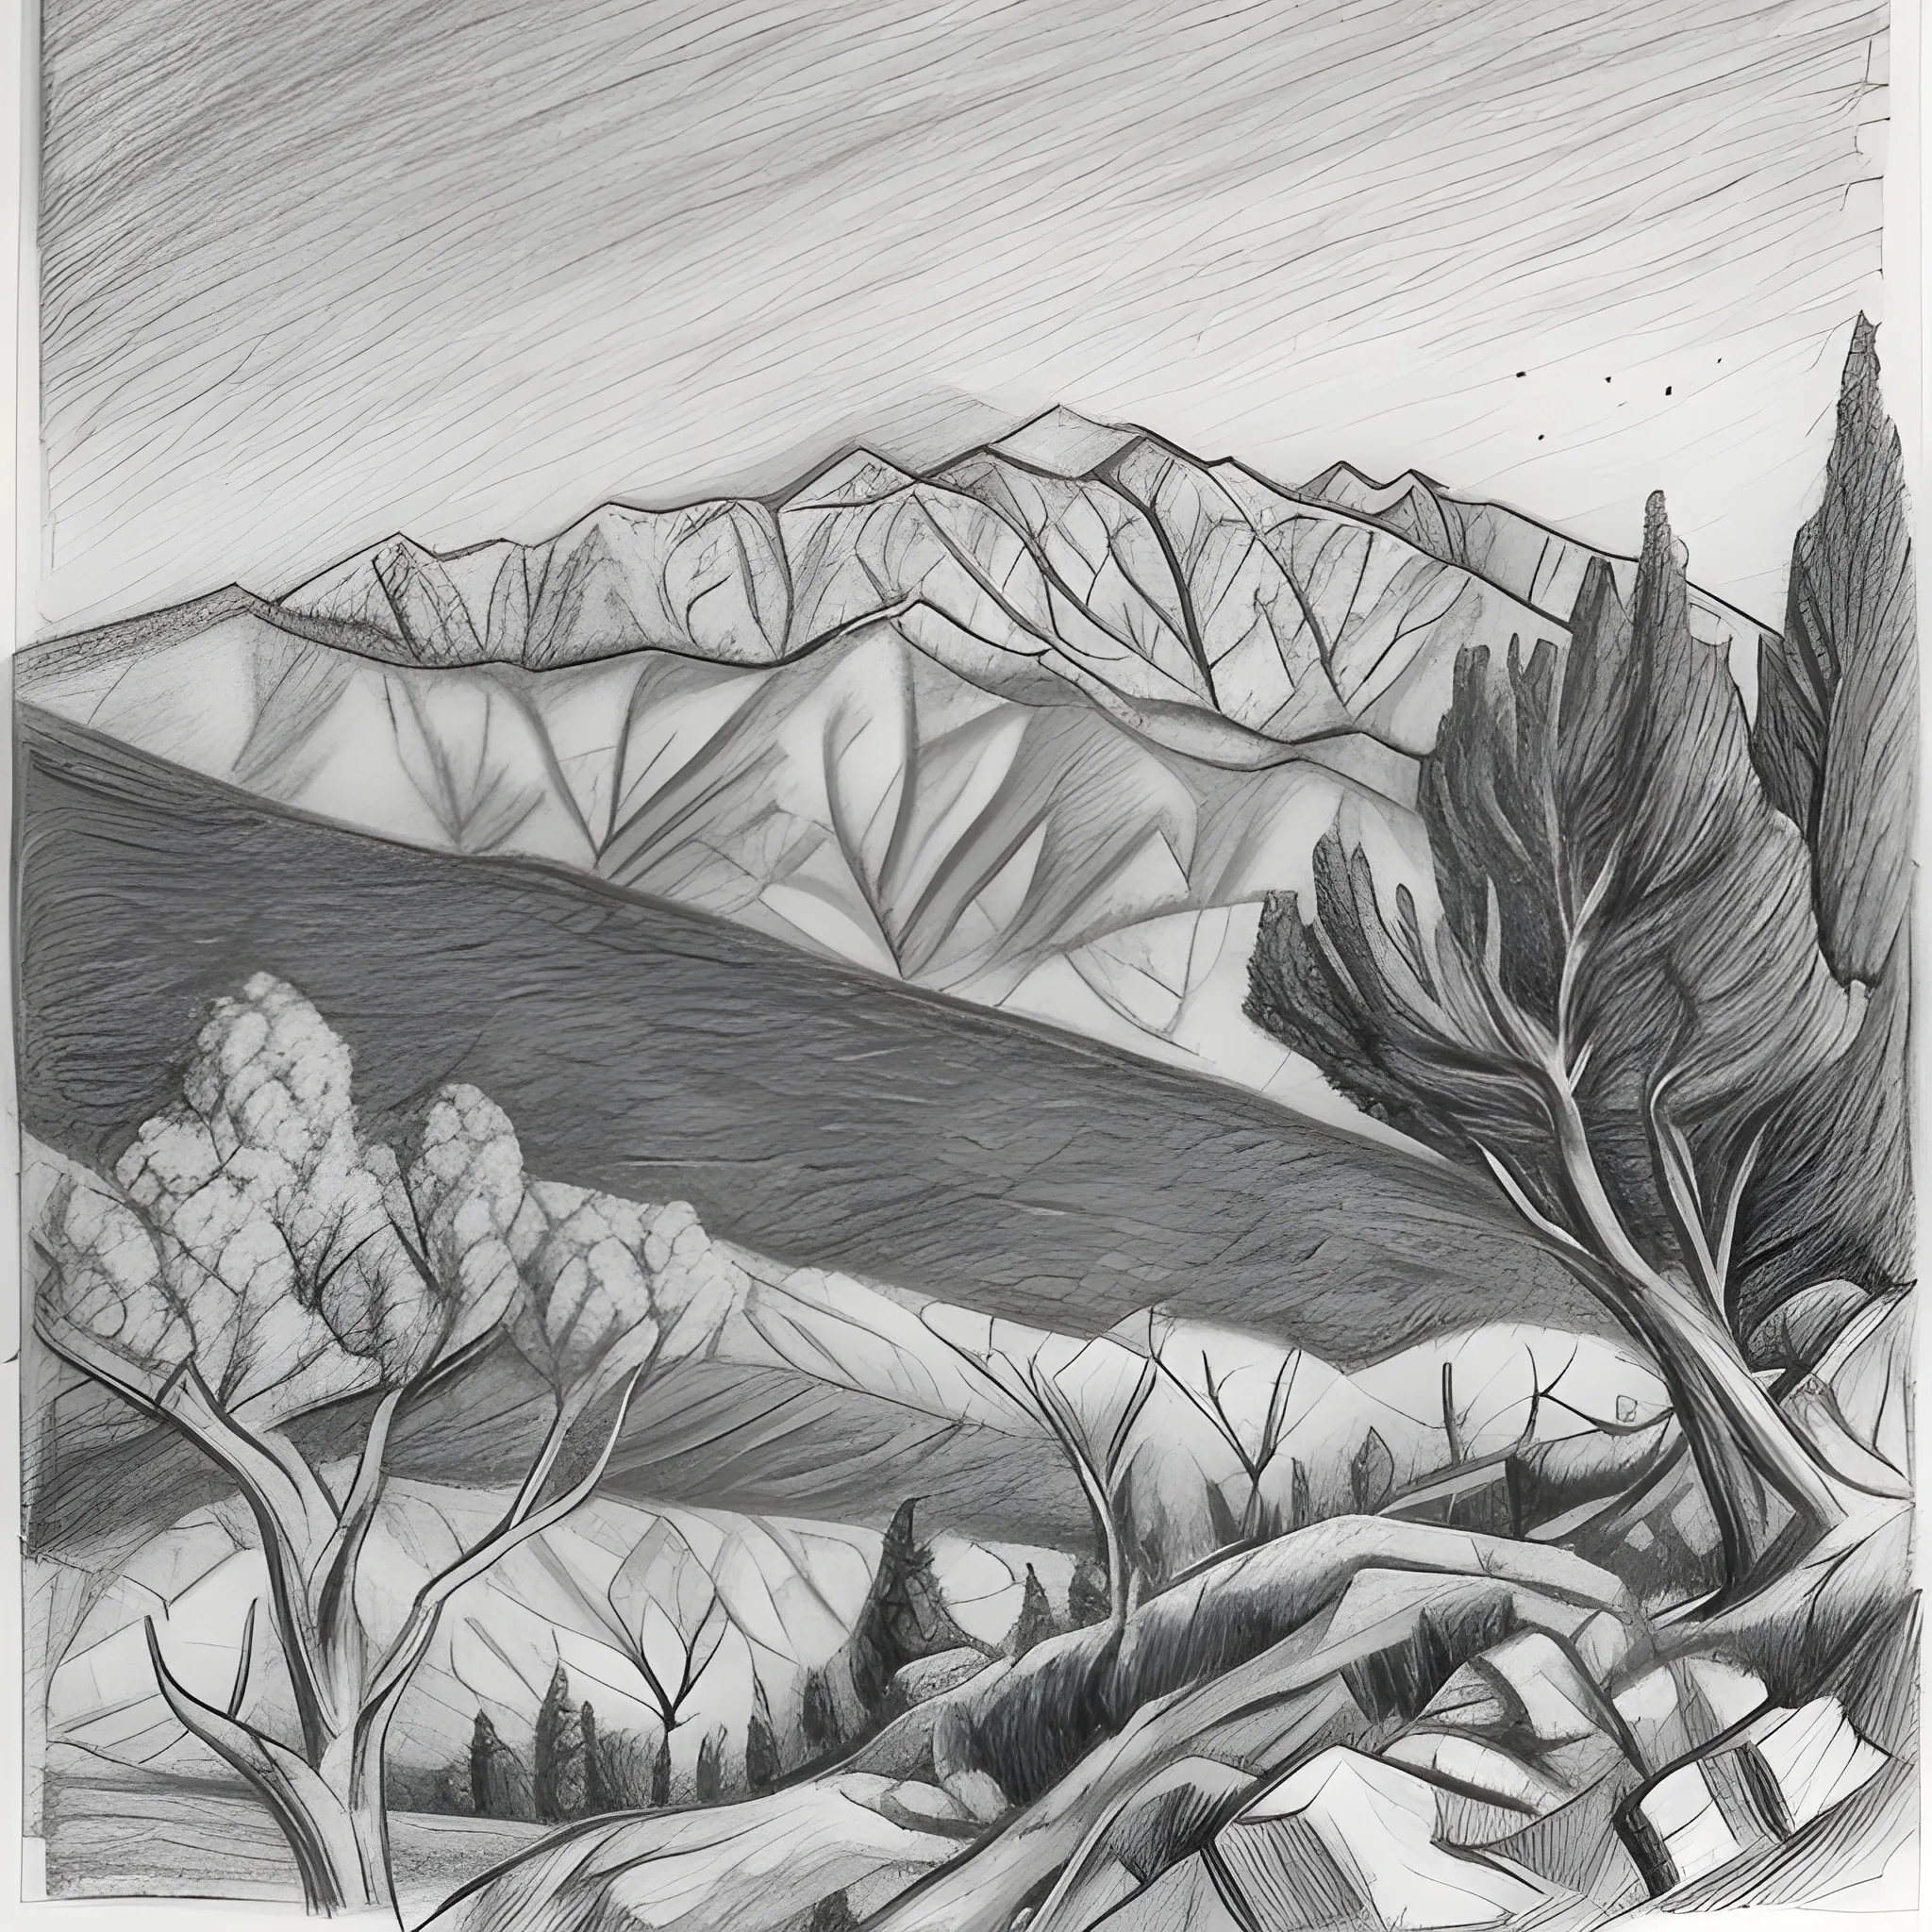 A pencil sketch with the top of the mount Canigou with some pigne trees in the foreground 